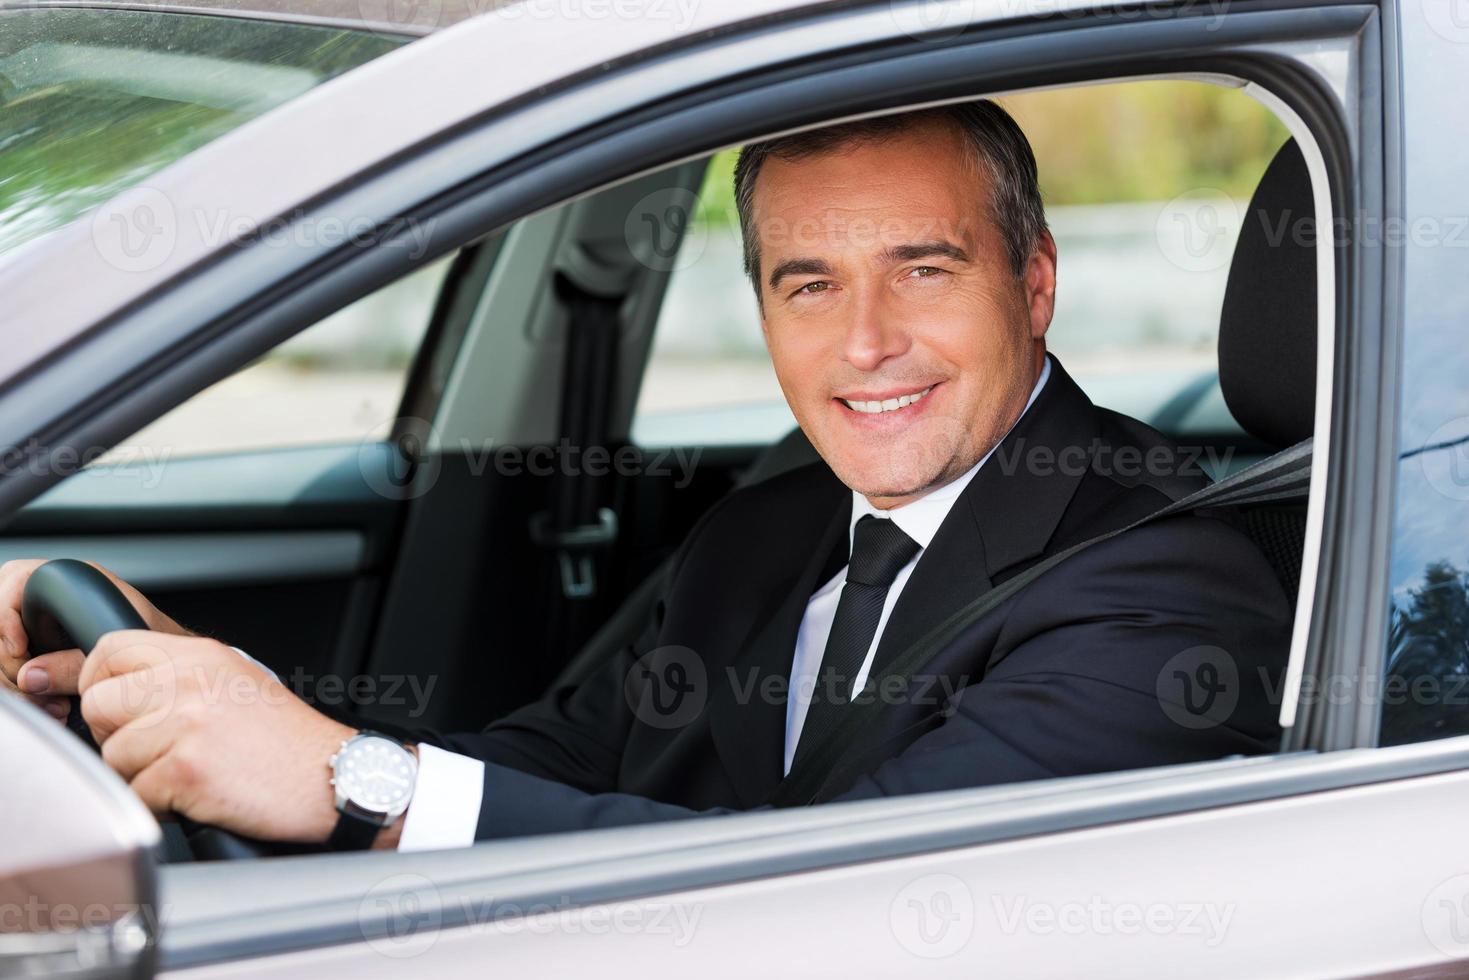 Feeling comfortable in his new car. Cheerful mature man in formalwear driving car and smiling photo